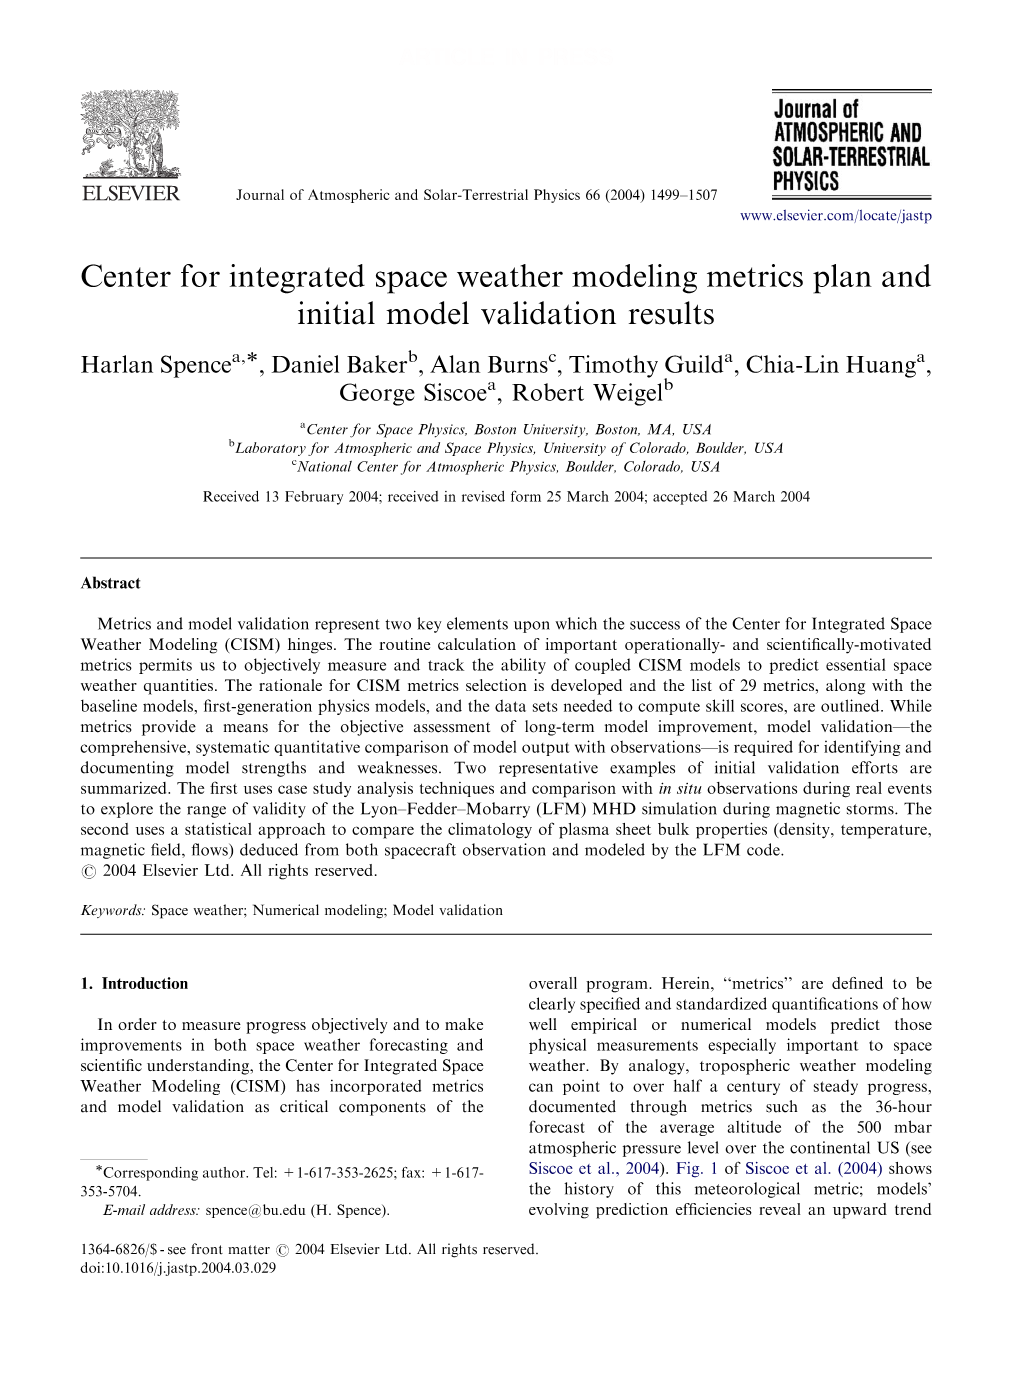 Center for Integrated Space Weather Modeling Metrics Plan and Initial